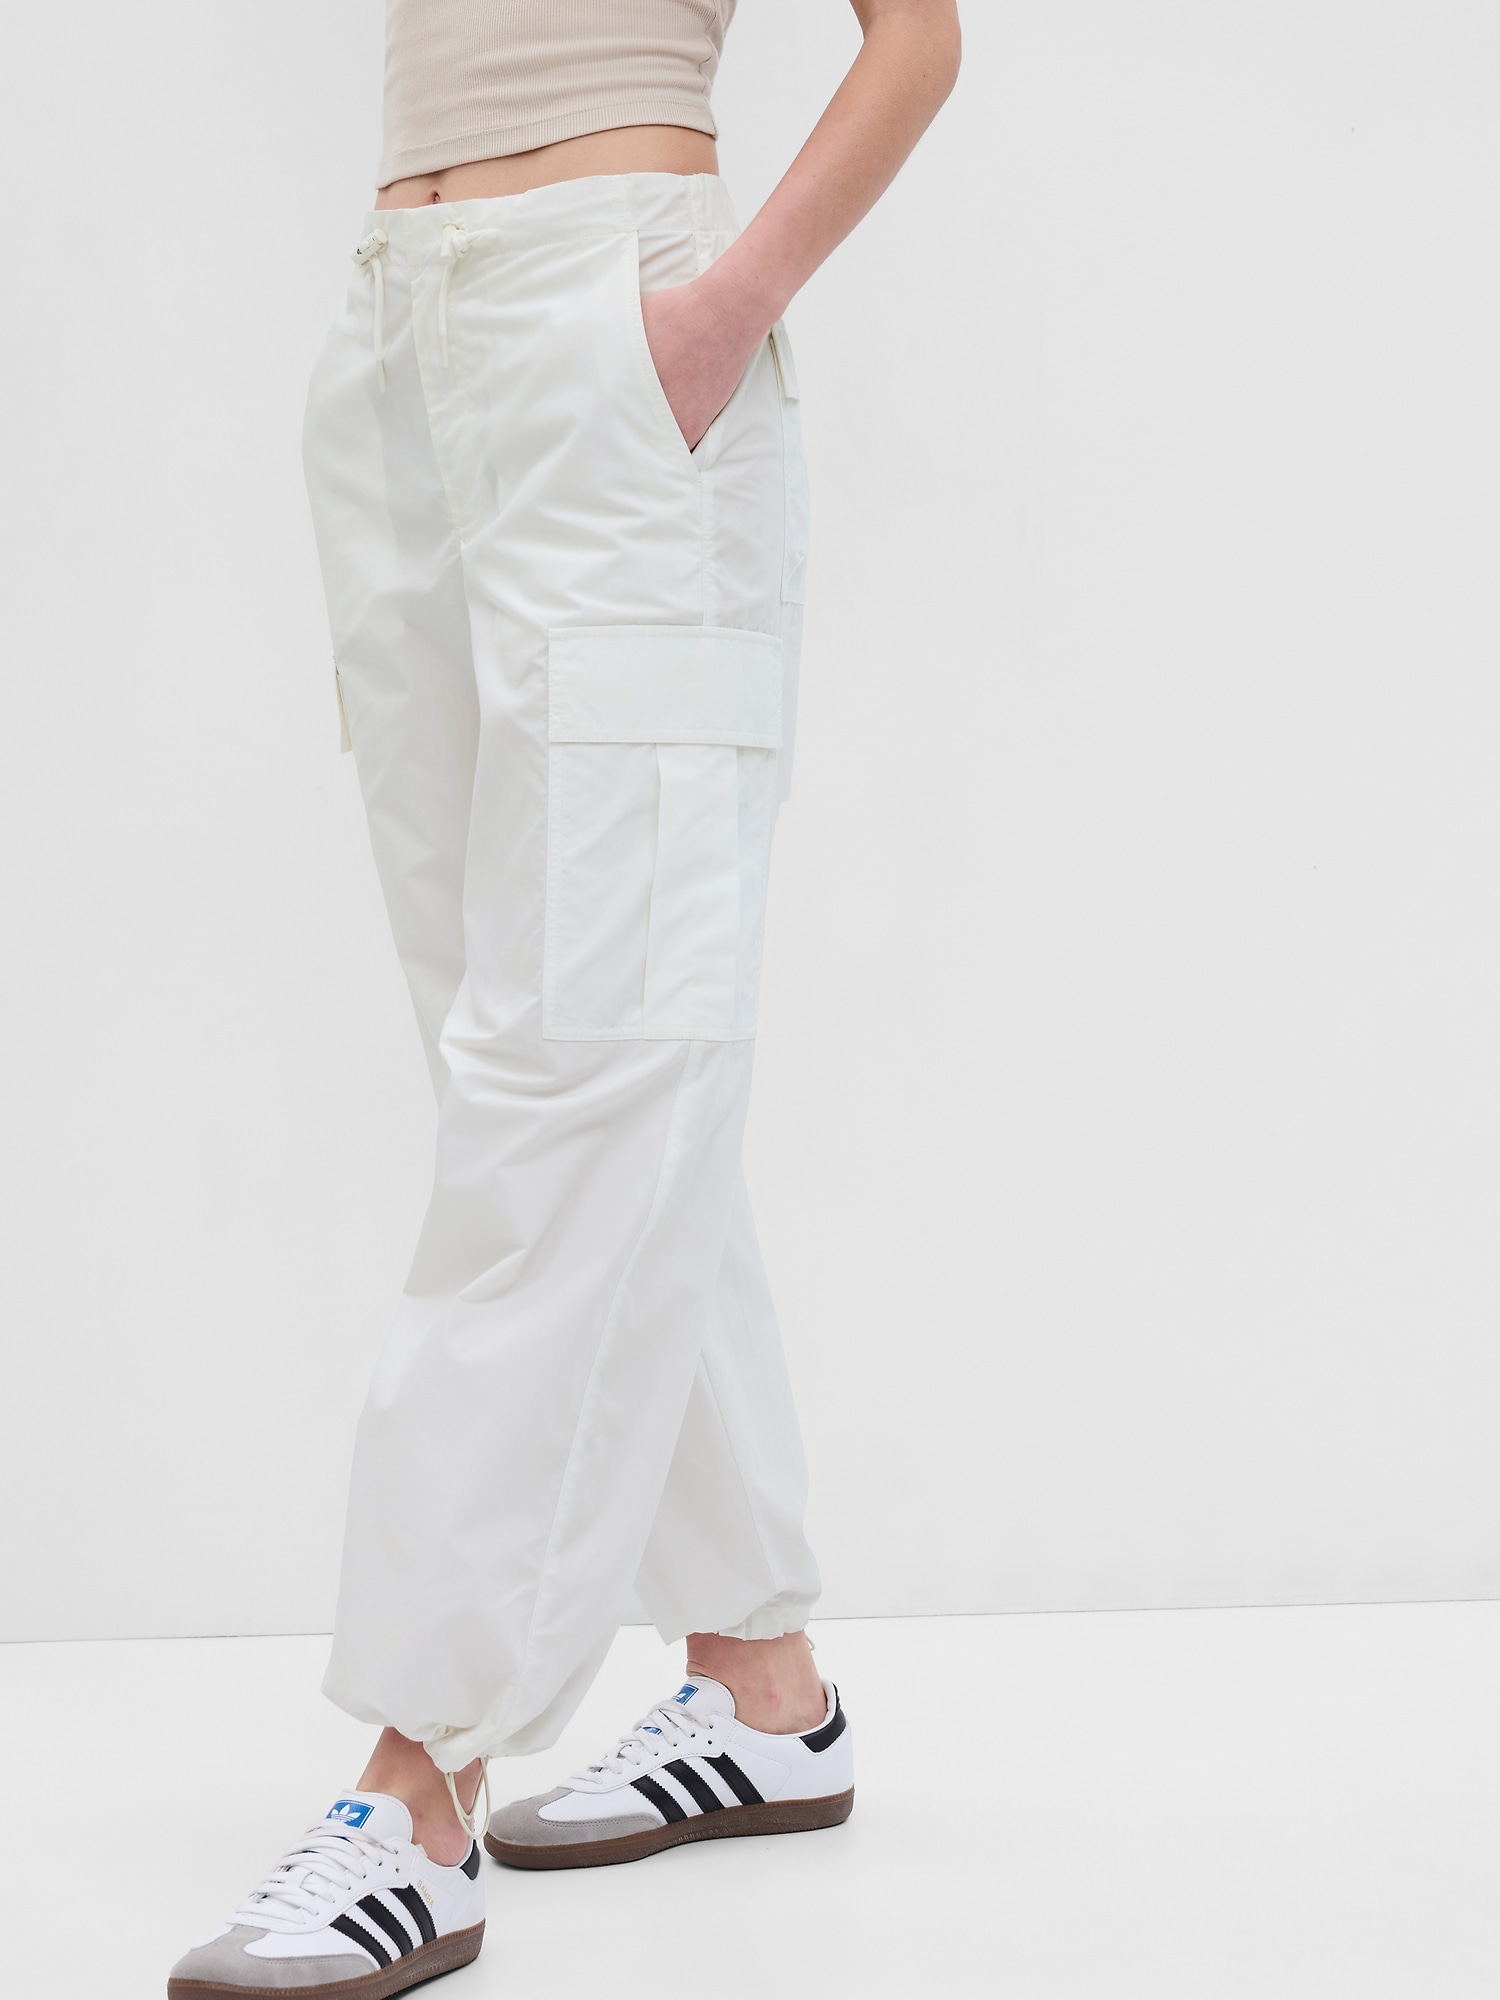 By Anthropologie Cargo Parachute Pants